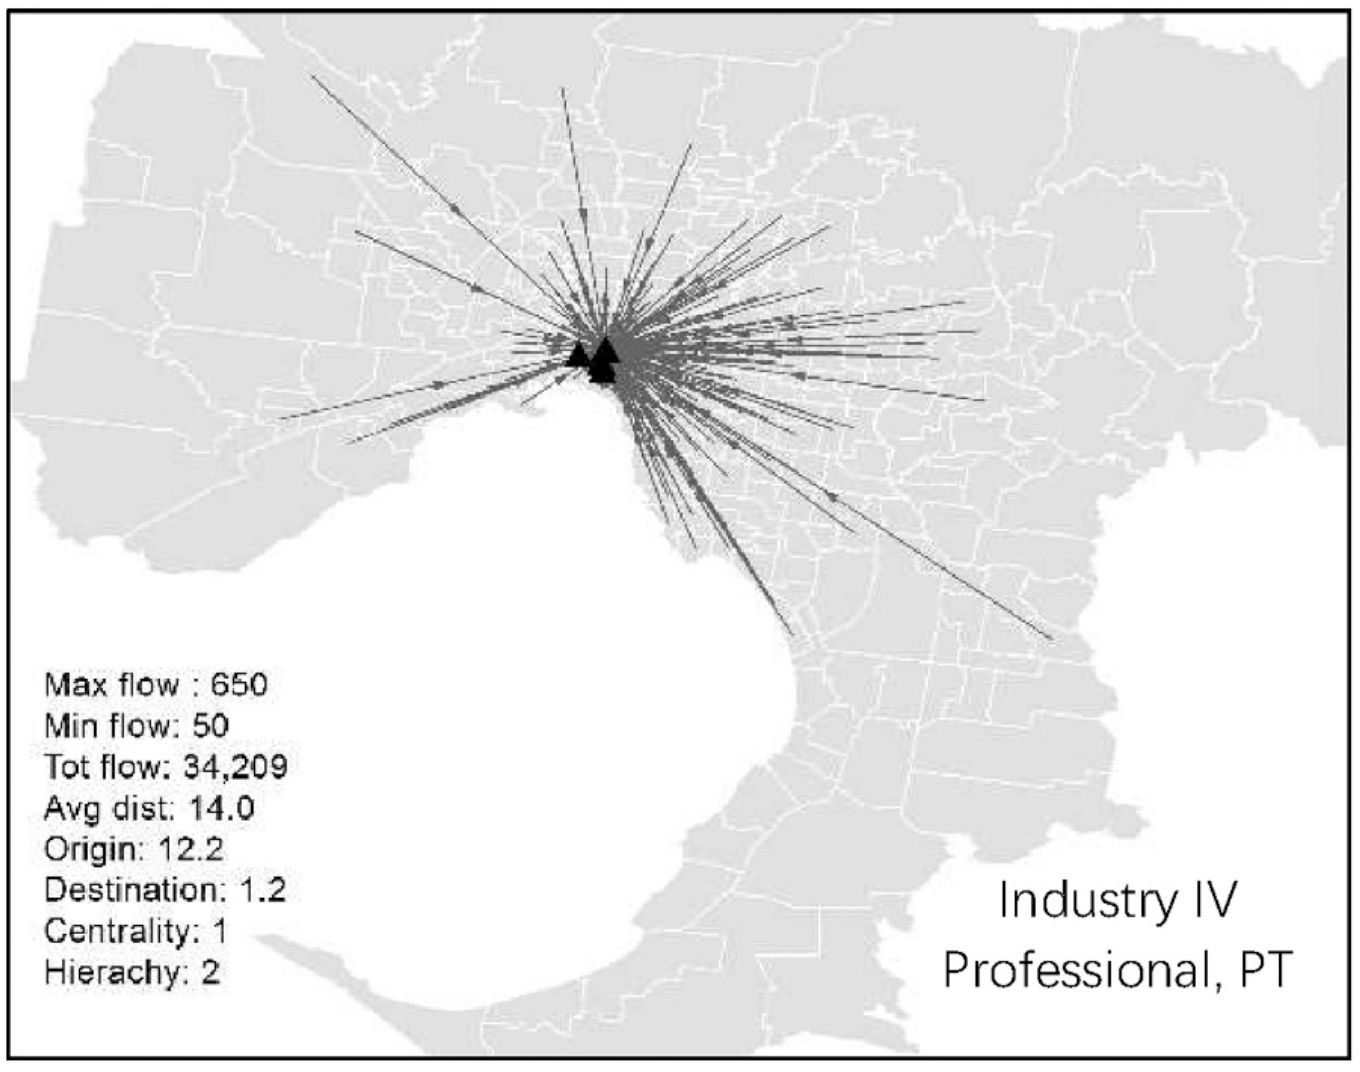 Public transport commuting patterns of professional scientific and financial workers. The authors